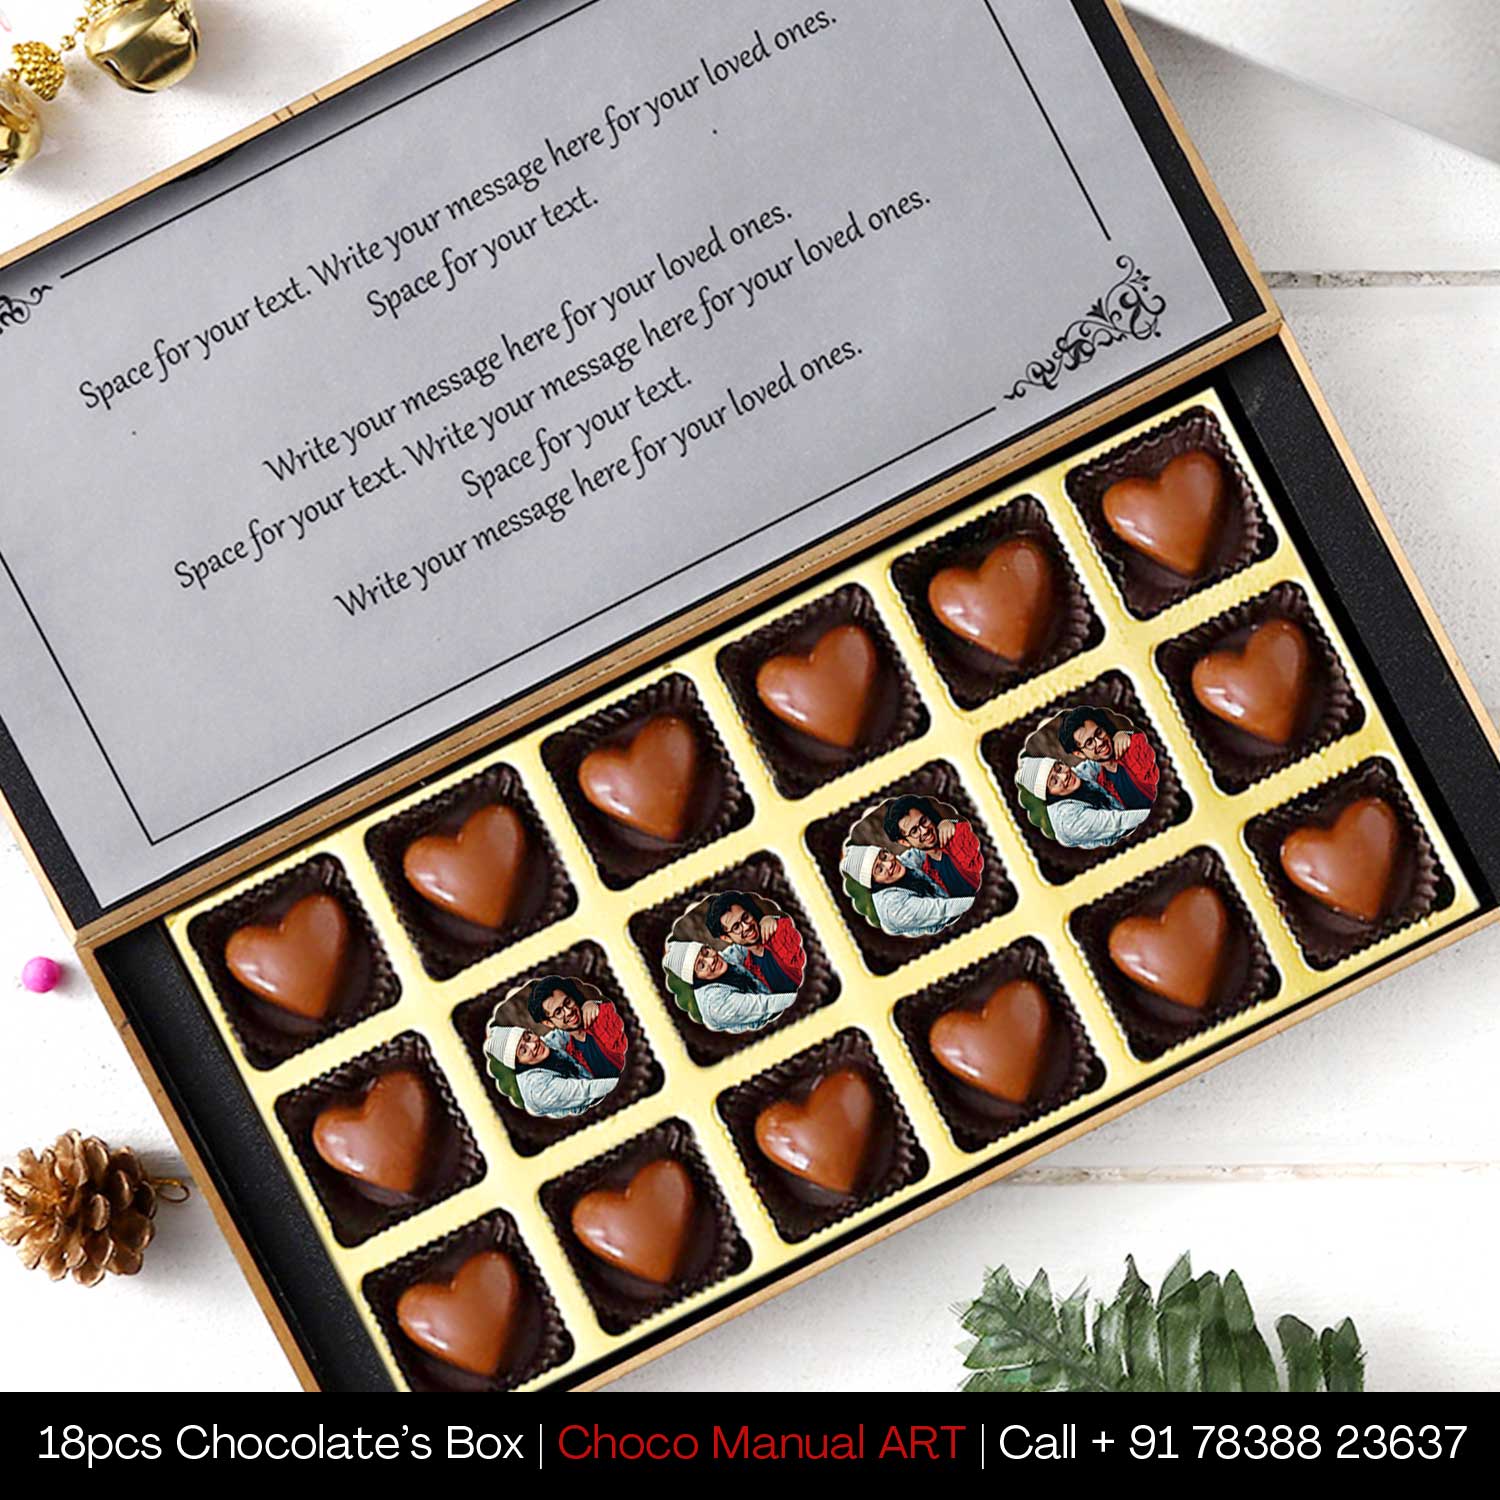 Kiss Day Heart Shape chocolates Special gift